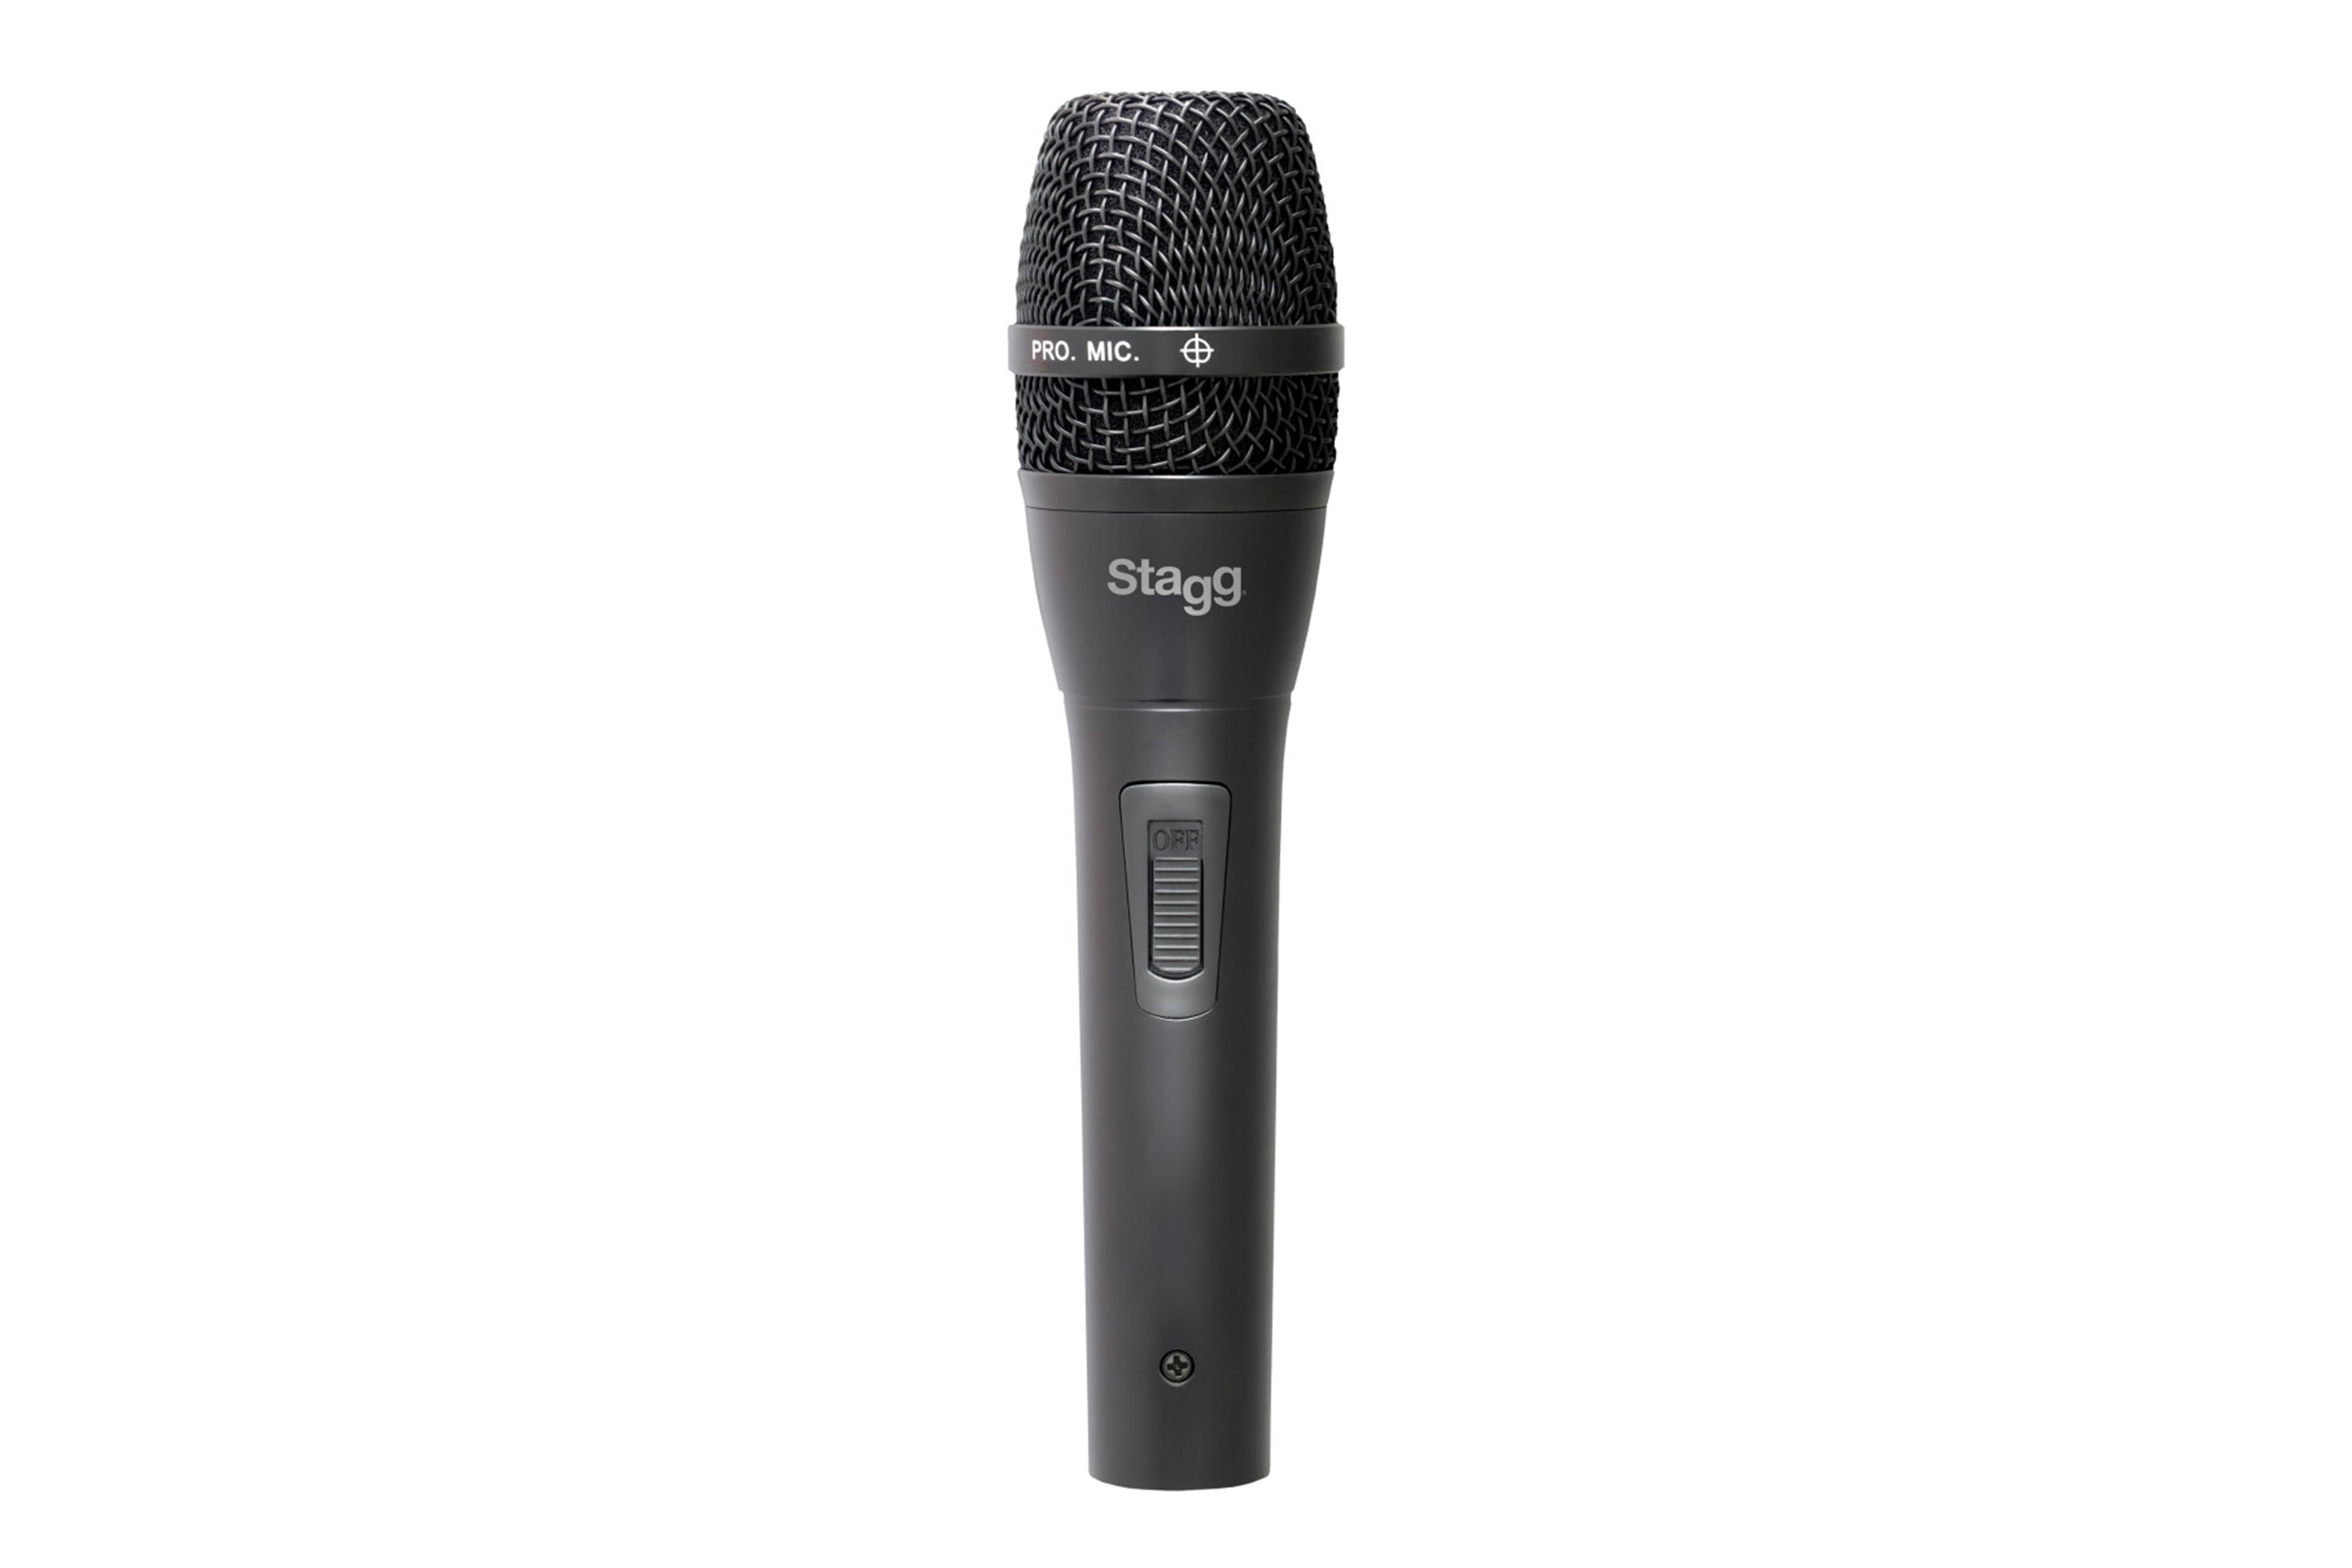 Stagg SDM80 Professional Microphone